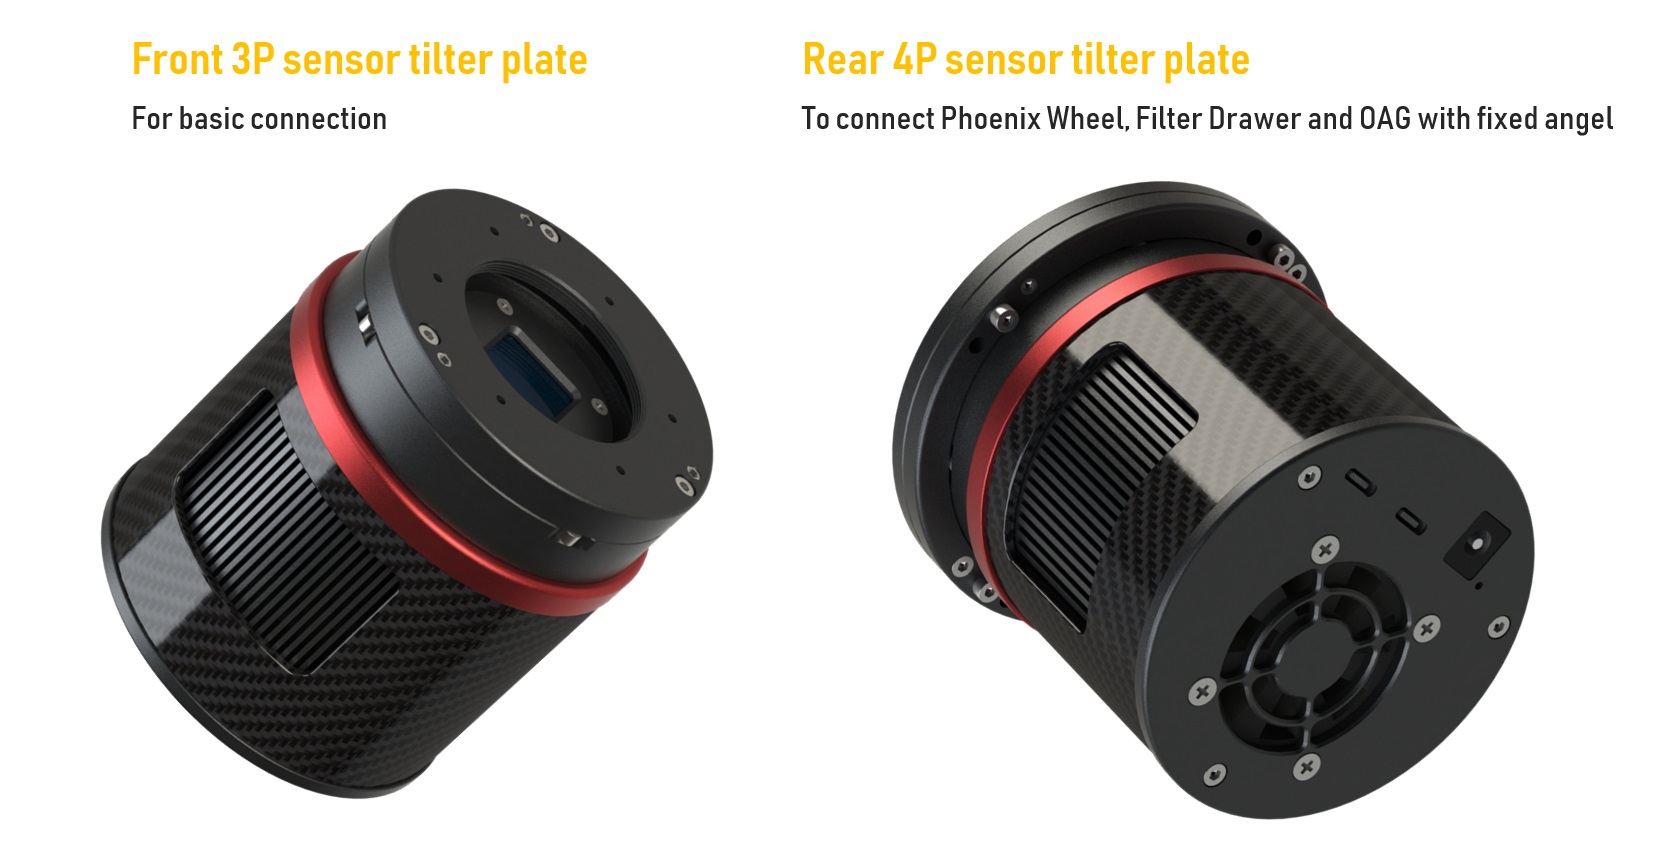   DSO cooled camera line is the most advanced product line in Player One history. [EN]  